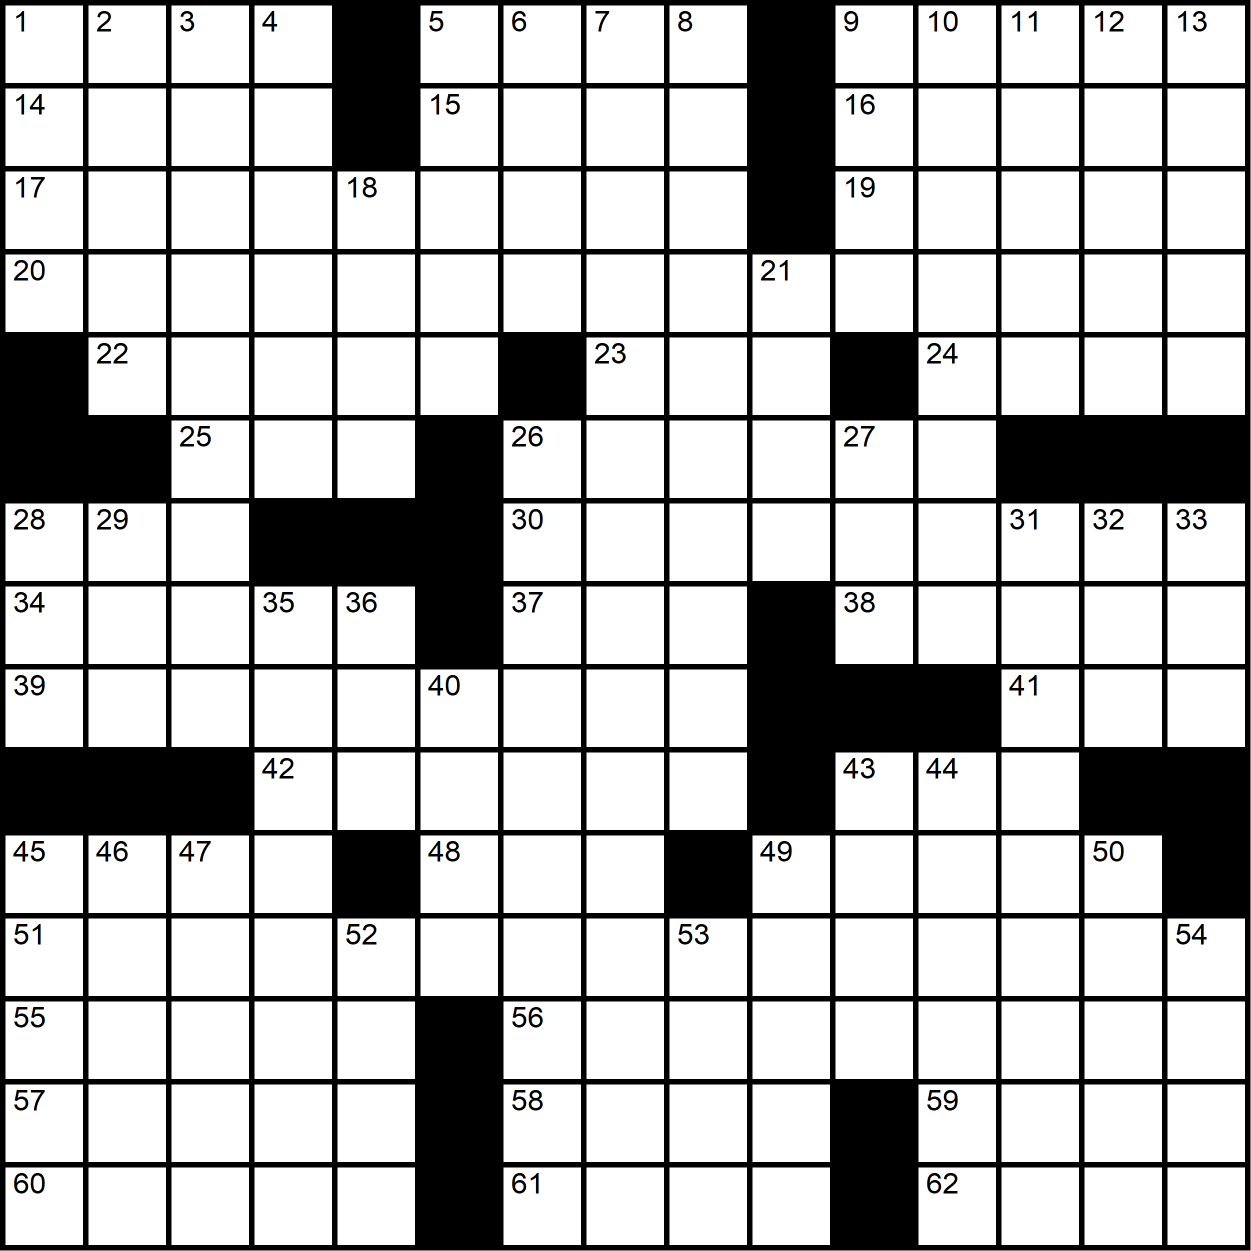 Crossword grid with a vertical 15 down the middle.